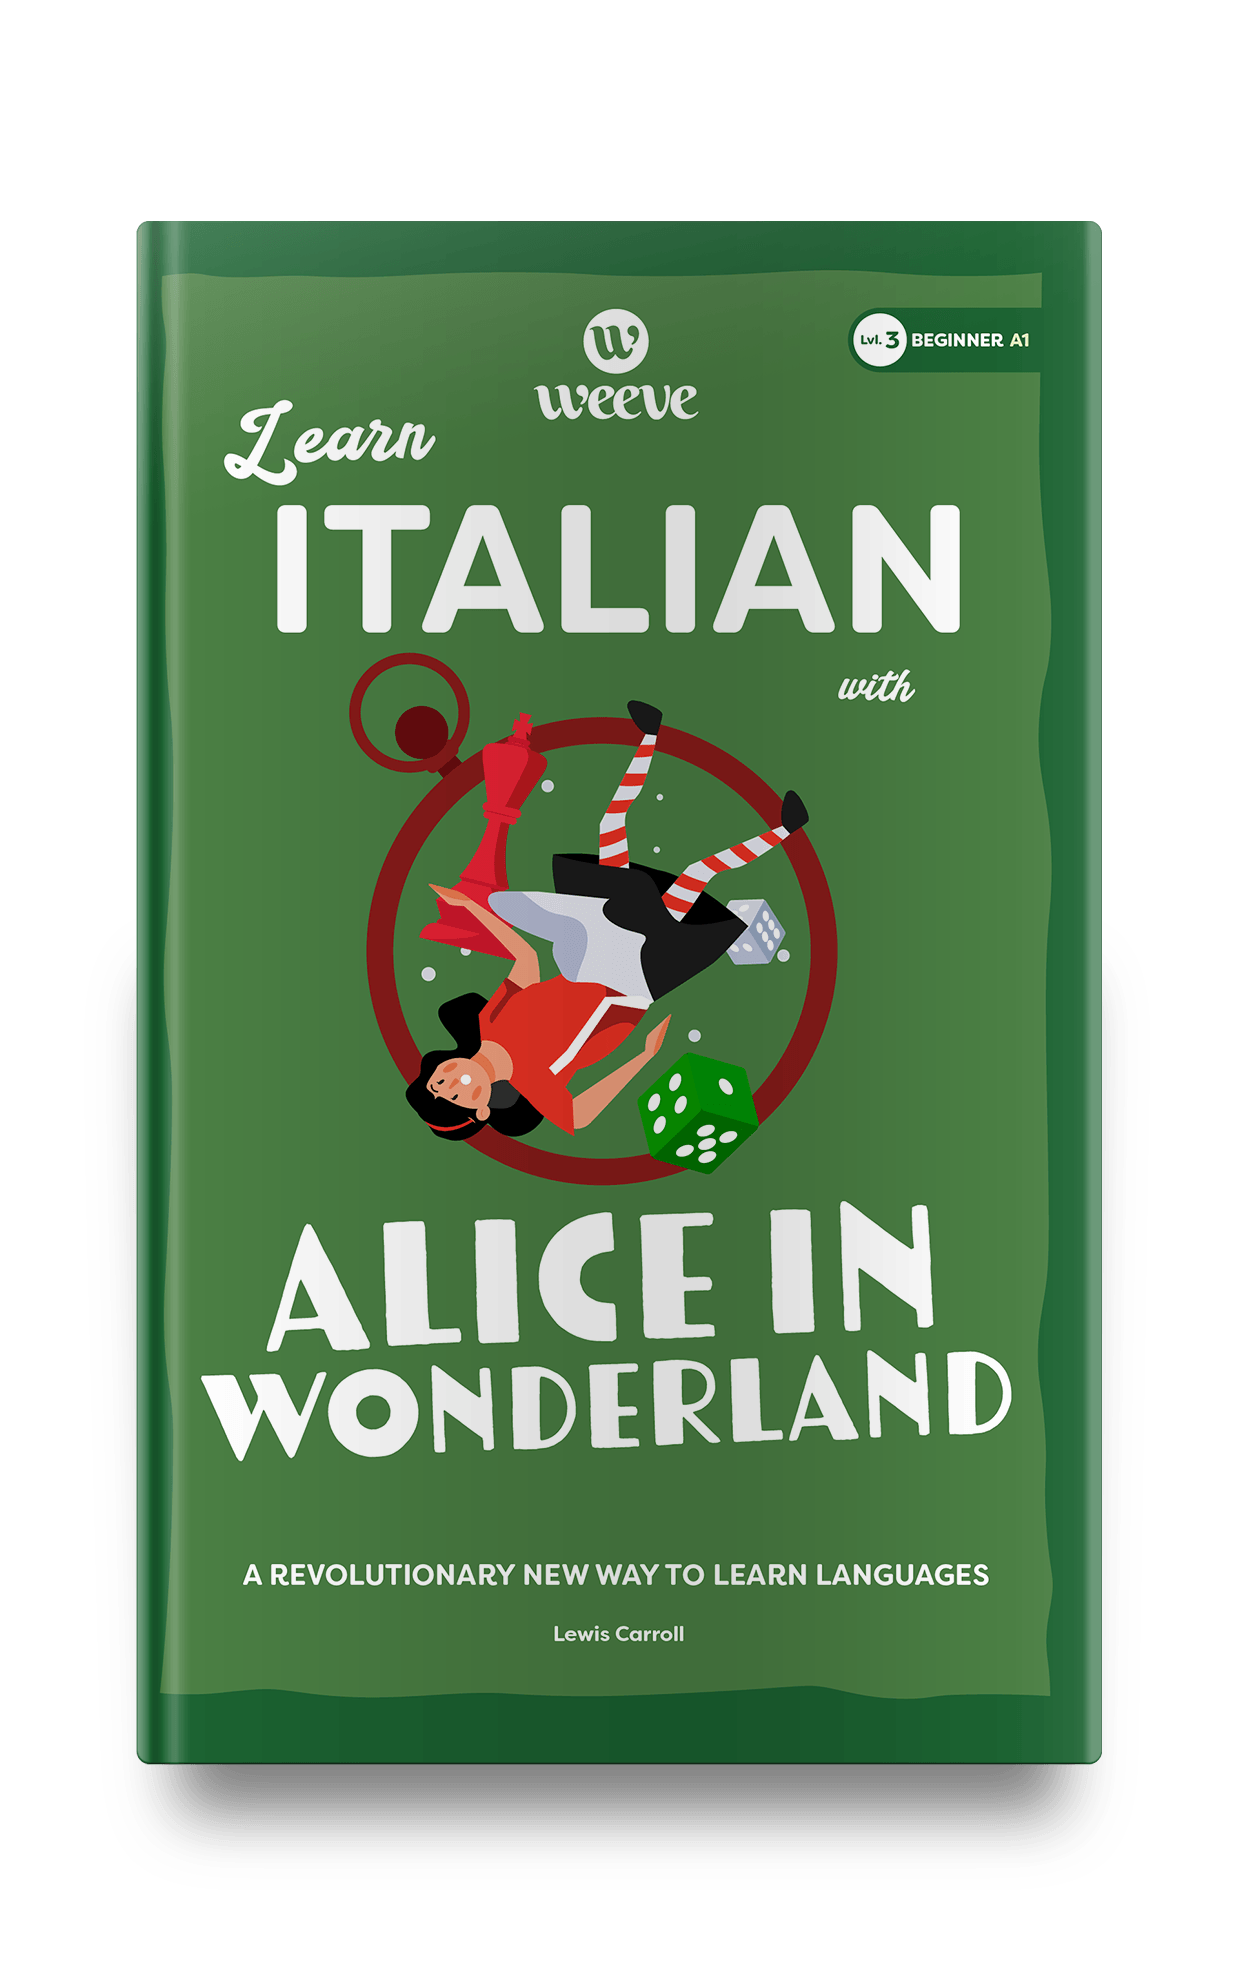 Learn Italian with Alice in Wonderland - Weeve